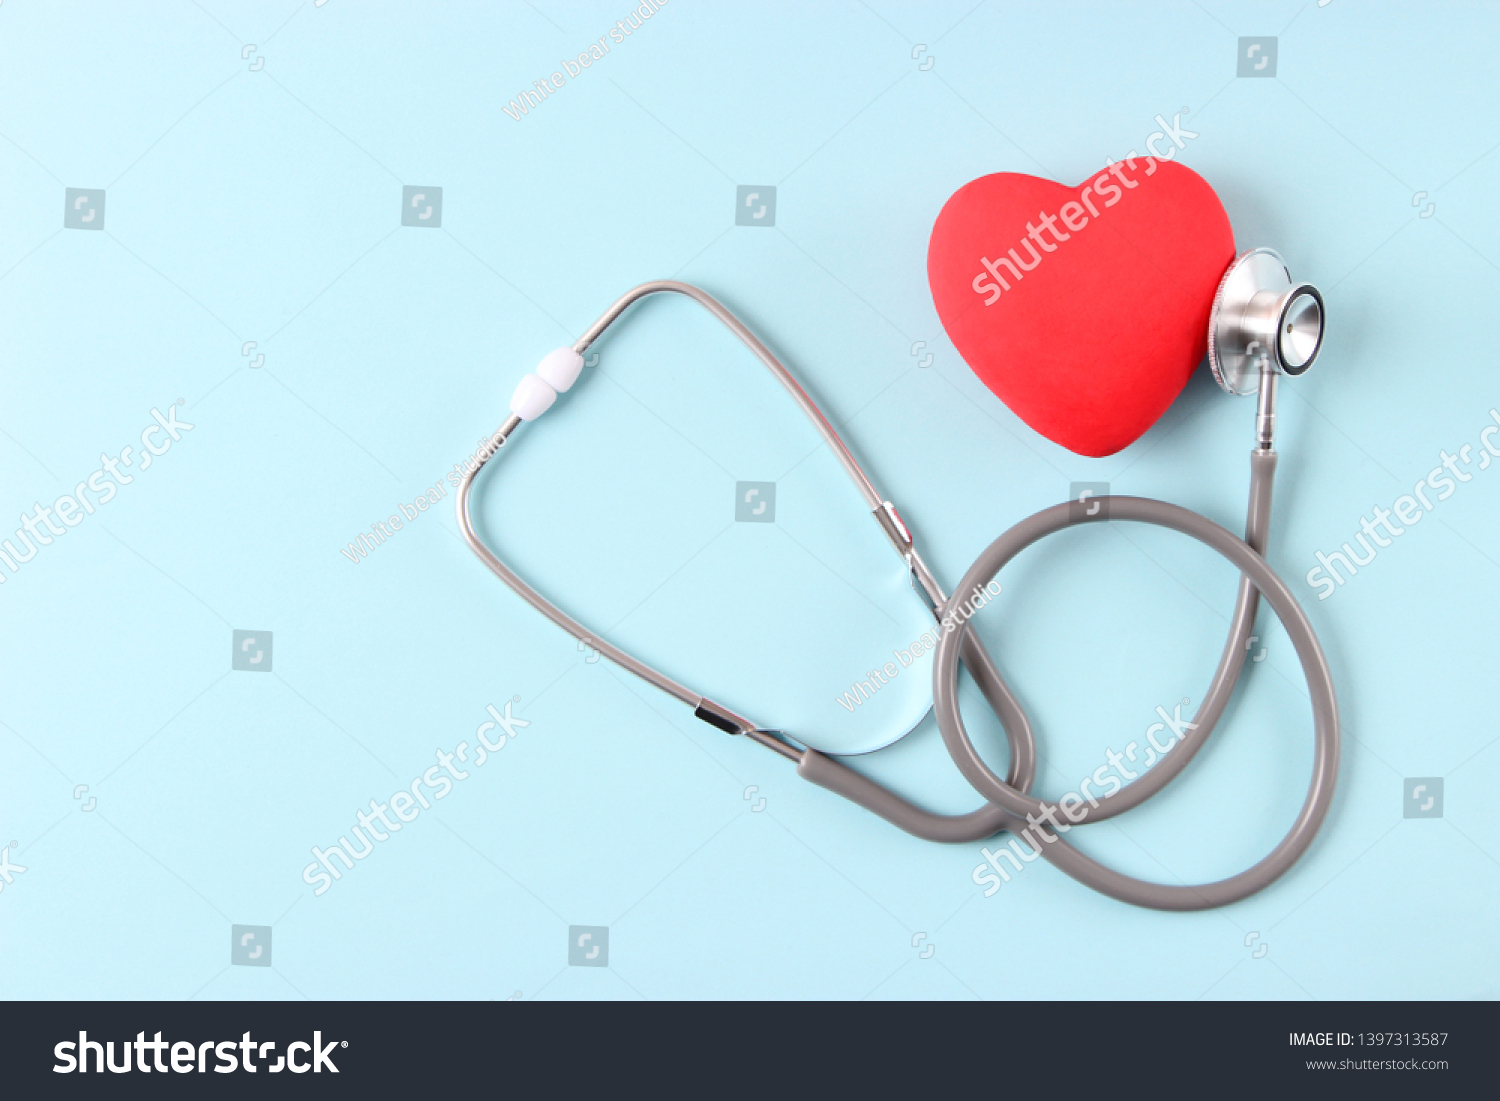 Stethoscope and heart on wooden color background. Health, medicine
 #1397313587